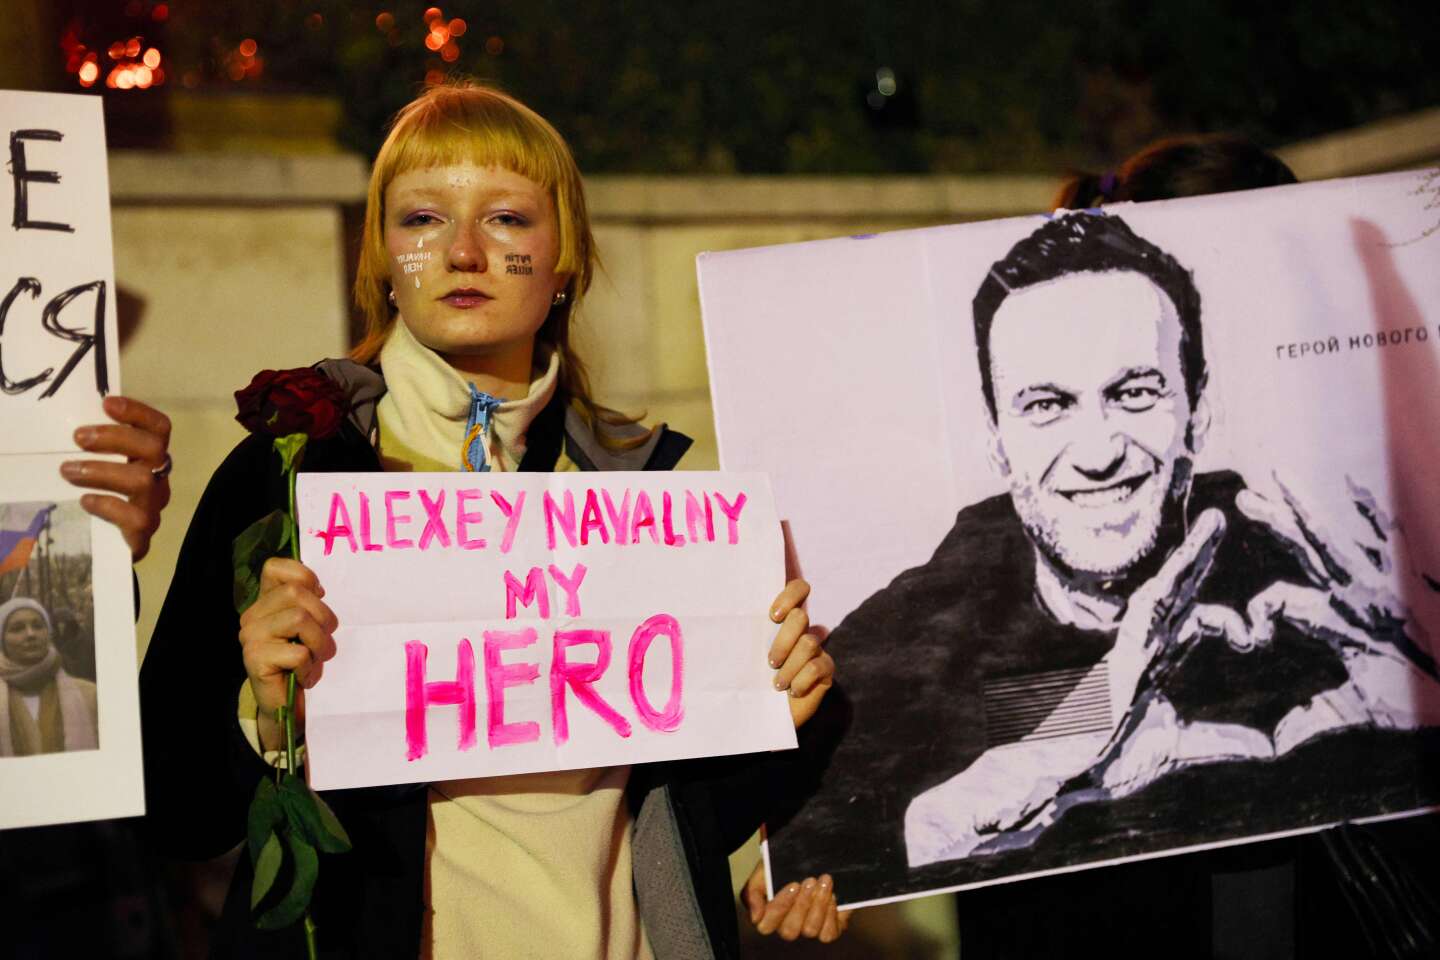 'Navalny followed a complex political path and paid the ultimate sacrifice'